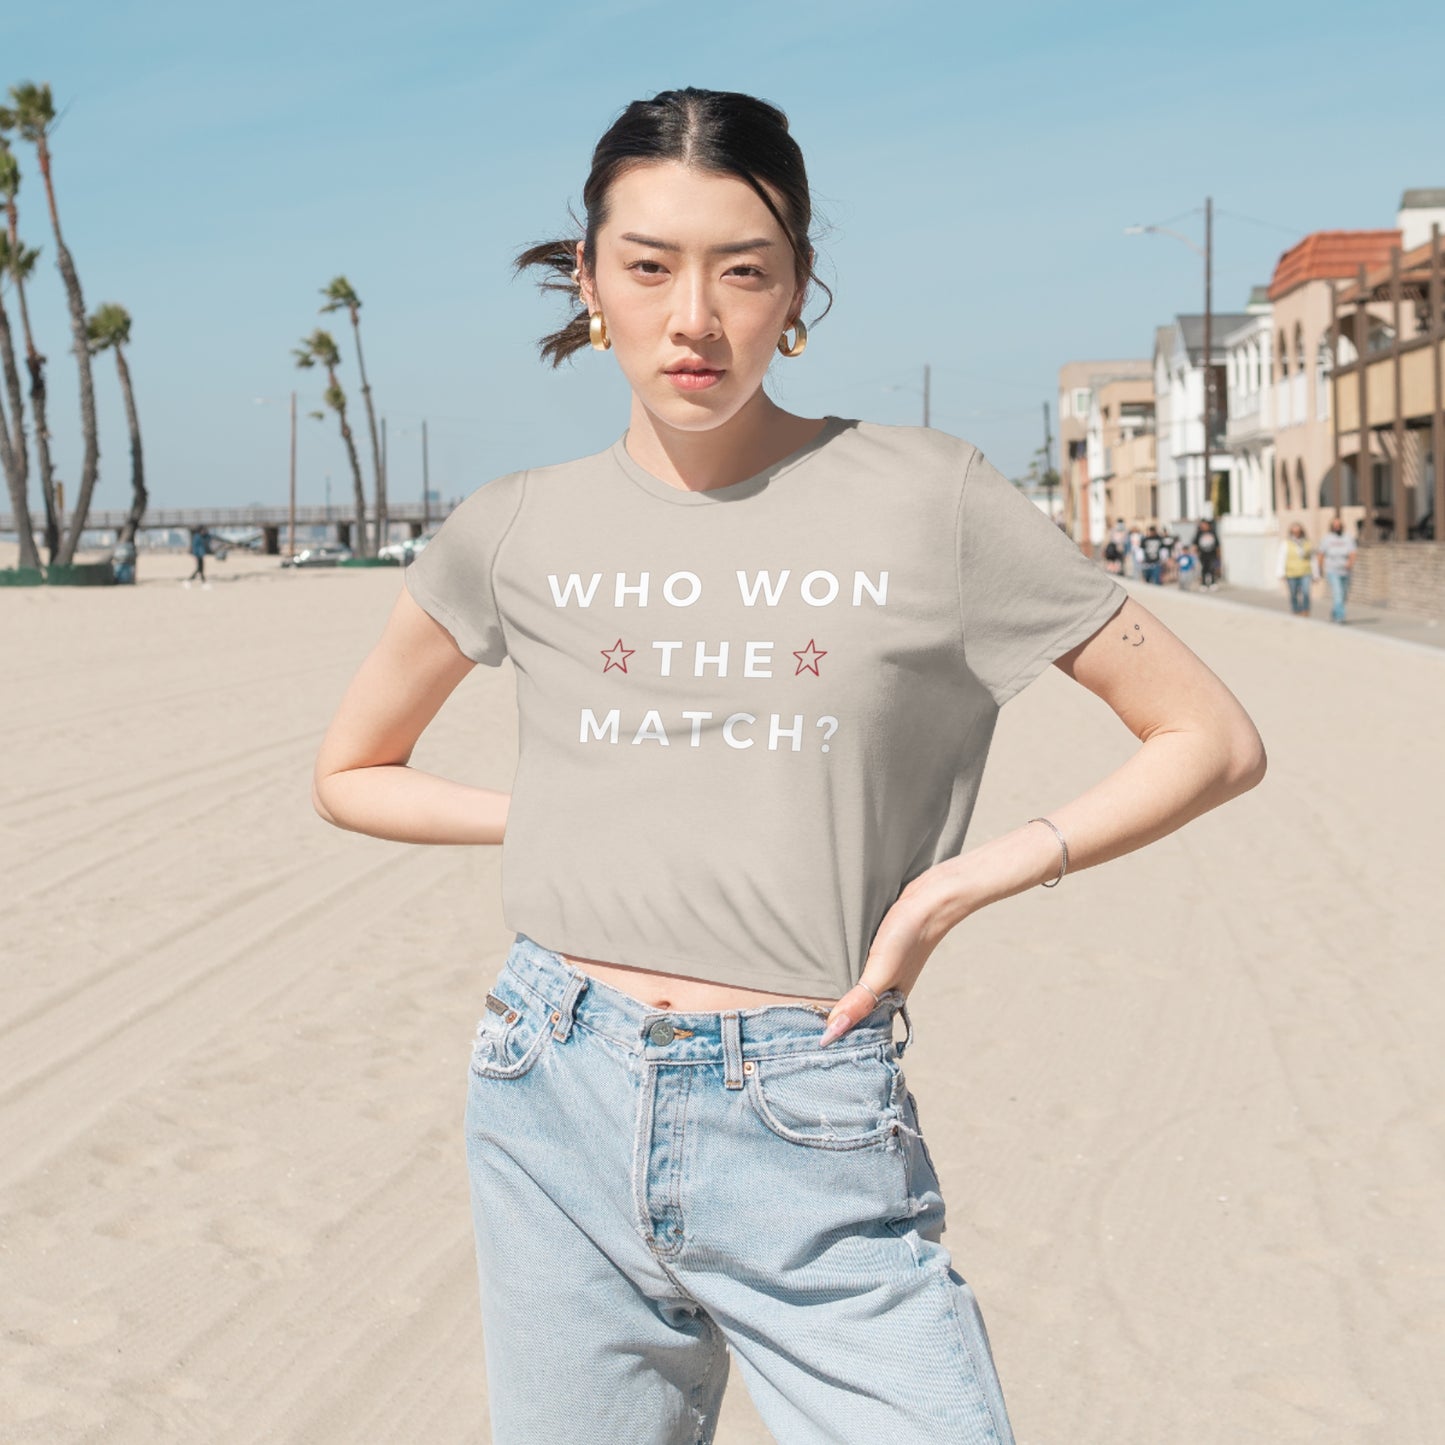 Who Won the Match Women's Flowy Cropped Tee